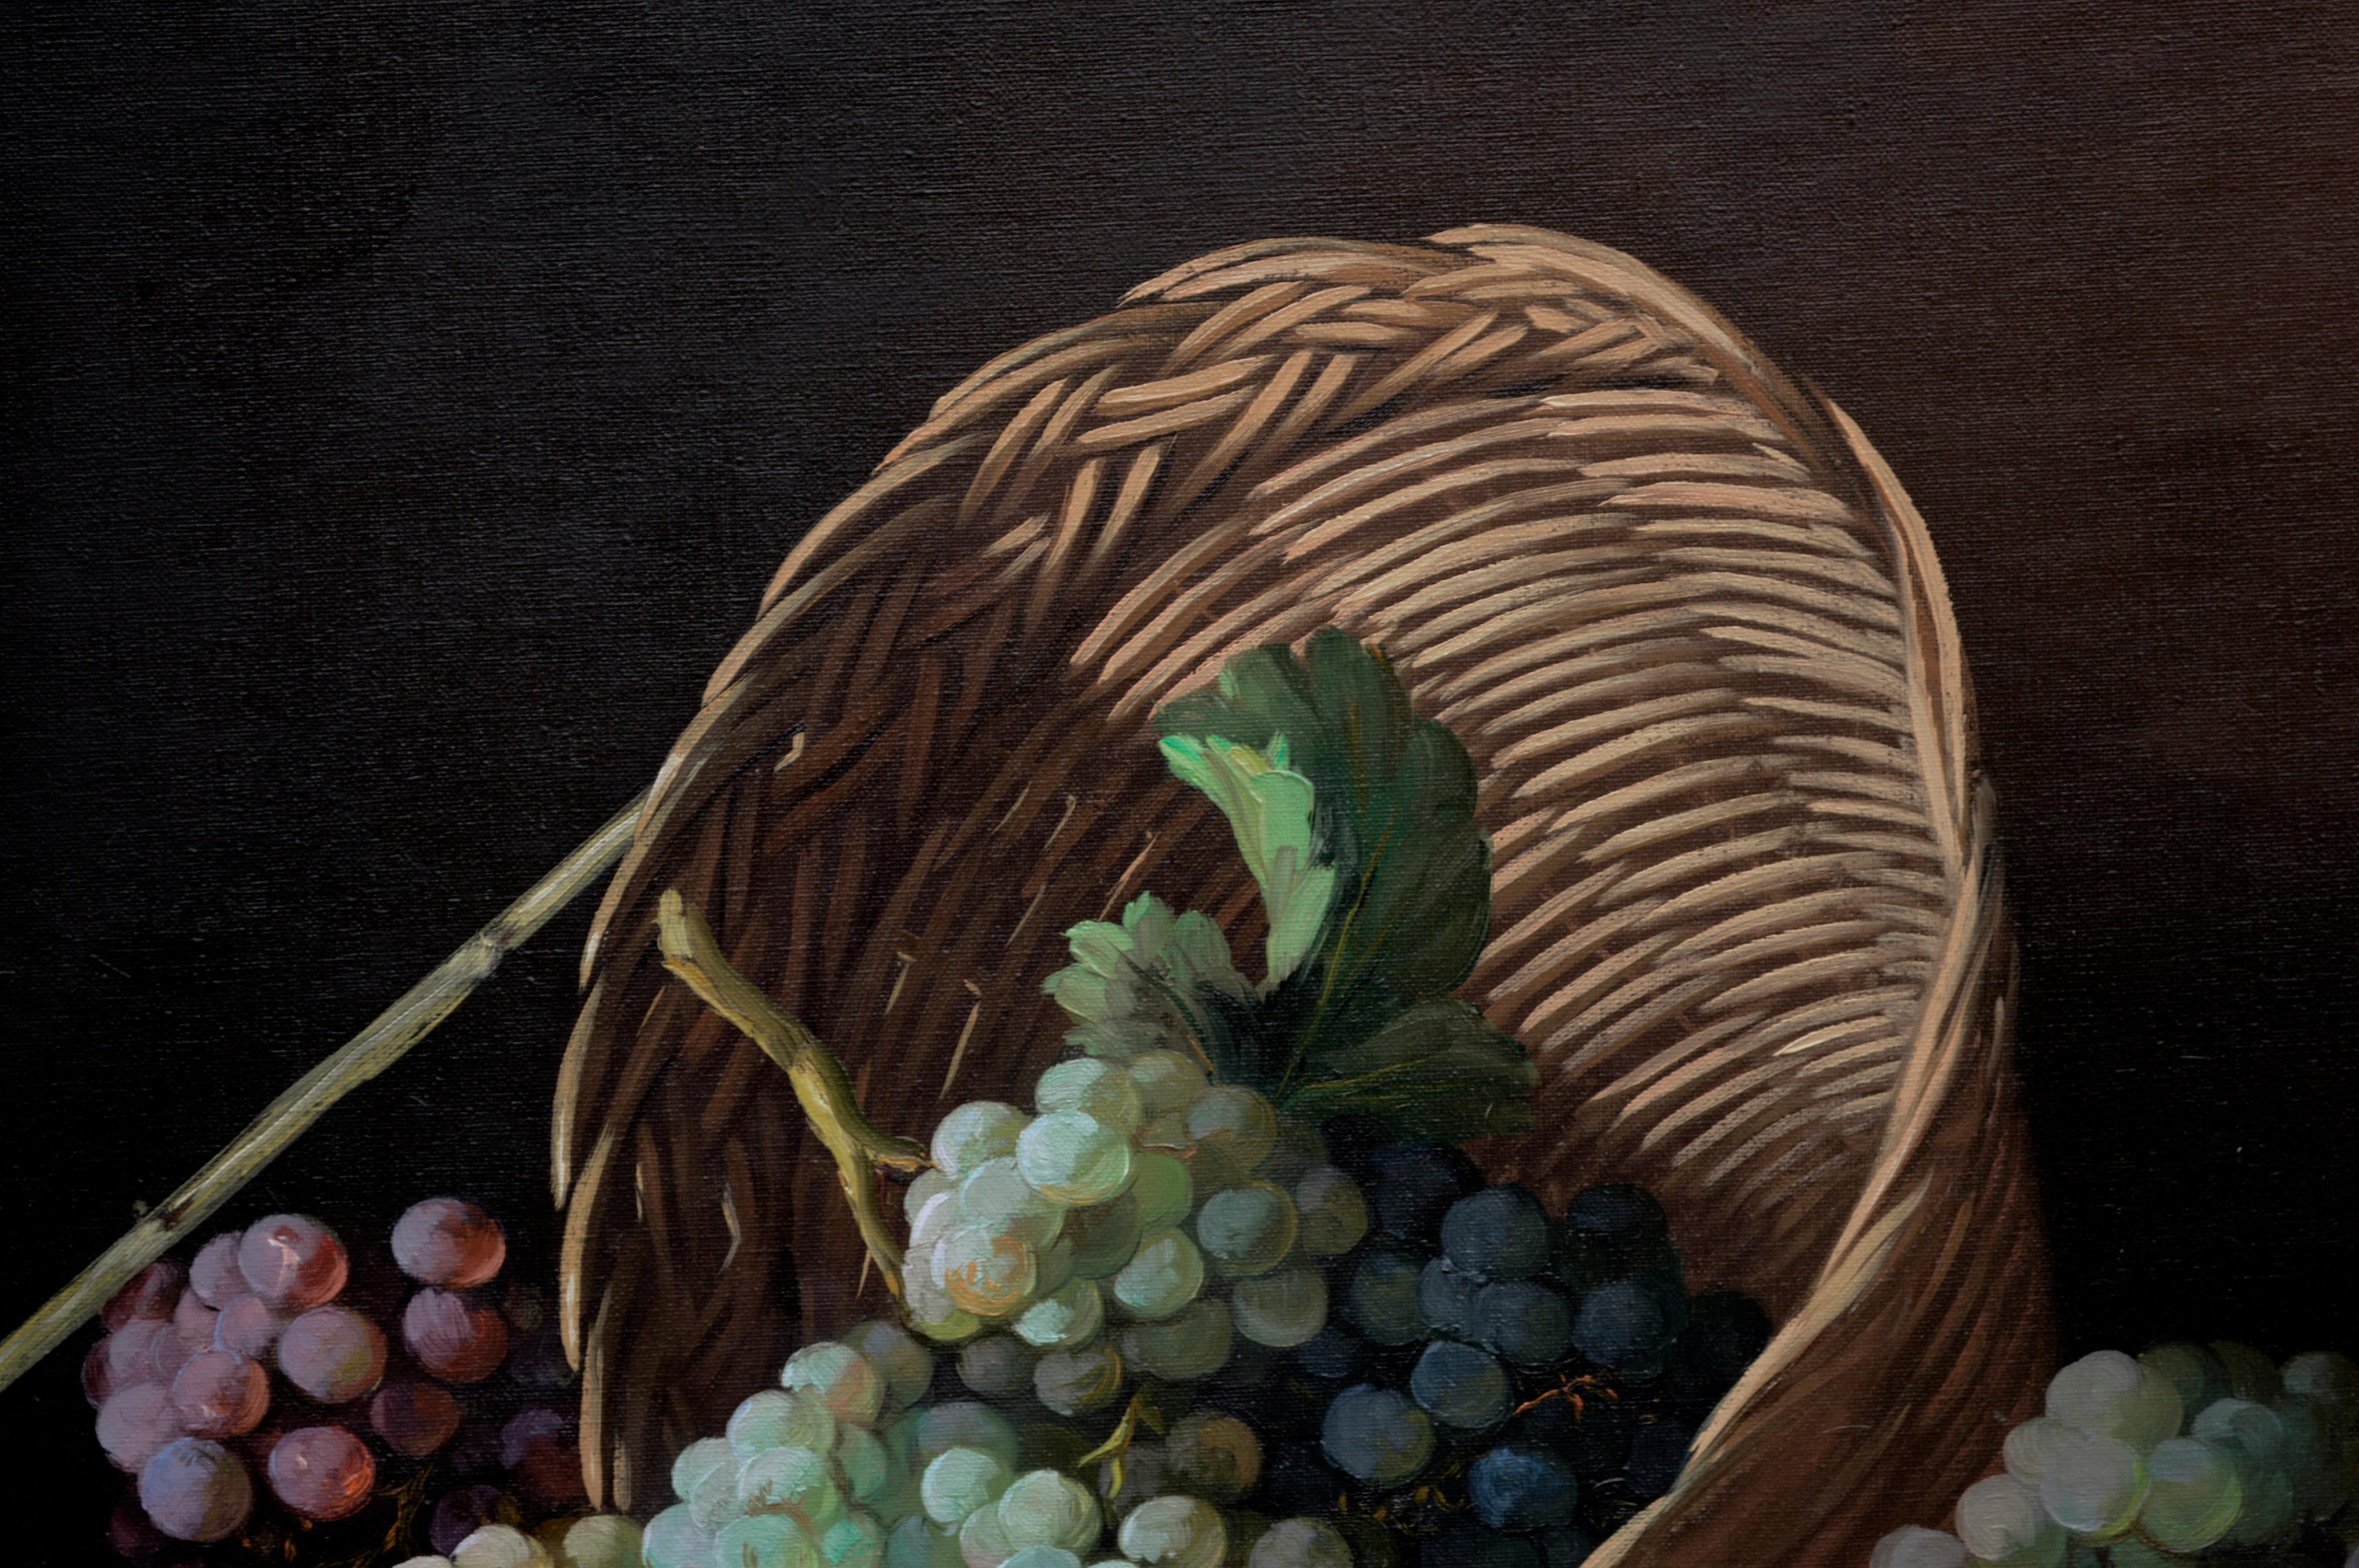 Mid Century Still-Life with Grapes, Copper Vessel & Wine  - Realist Painting by Manuel Ventura Millán